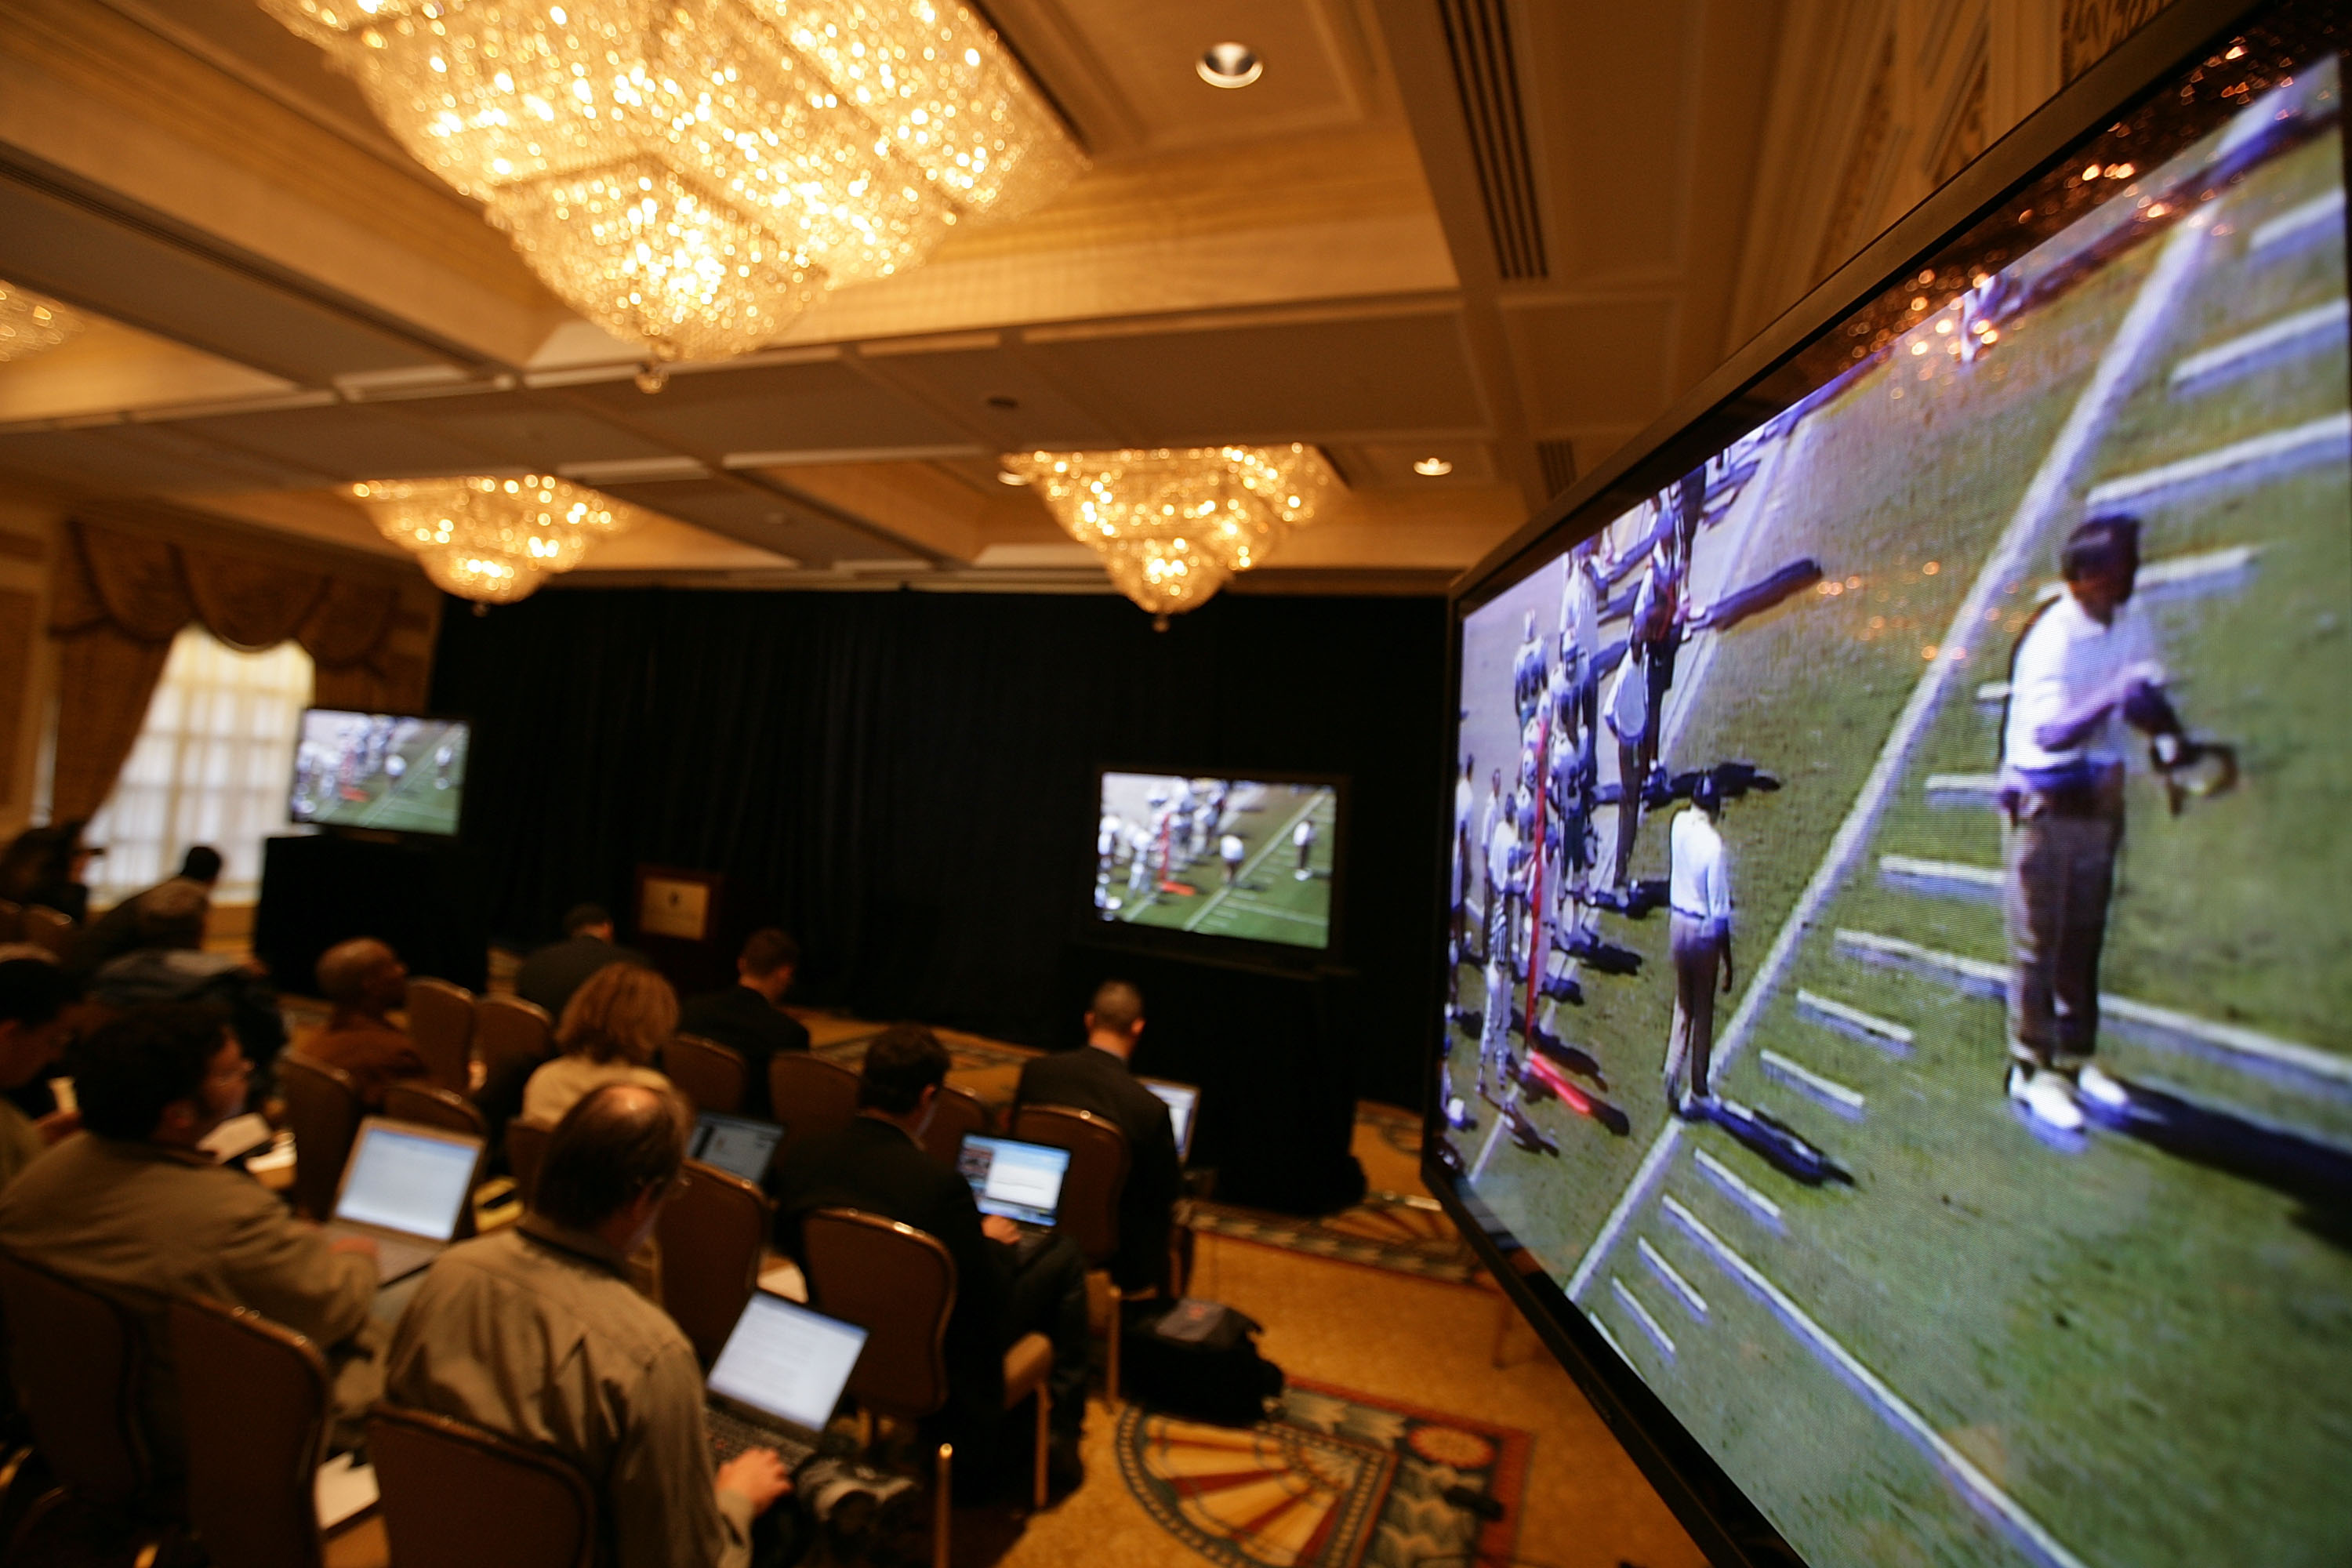 NEW YORK - MAY 13: Videotapes taken by former New England Patriots video operator Matthew Walsh are shown to the media on May 13, 2008 at the Intercontinental Hotel in New York City. Walsh was there to discuss videotaping practices used by the Patriots in